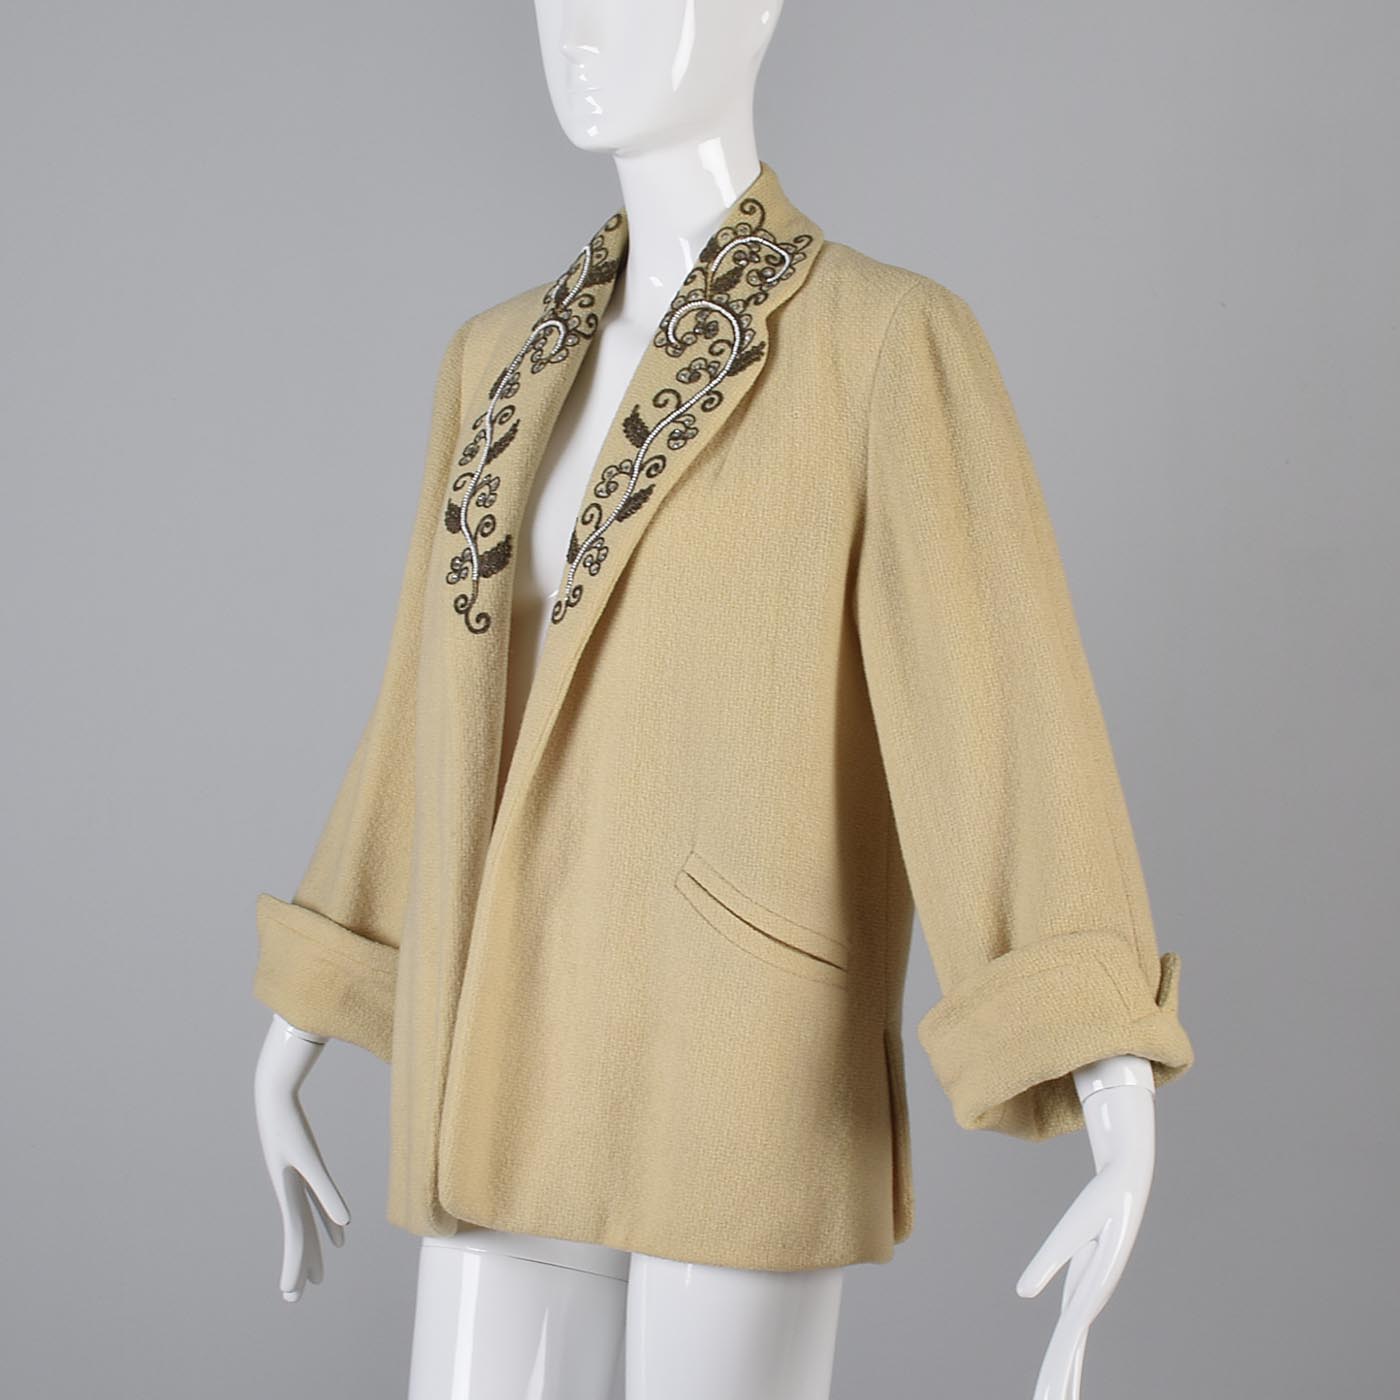 1940s Clutch Coat with Beaded Lapels